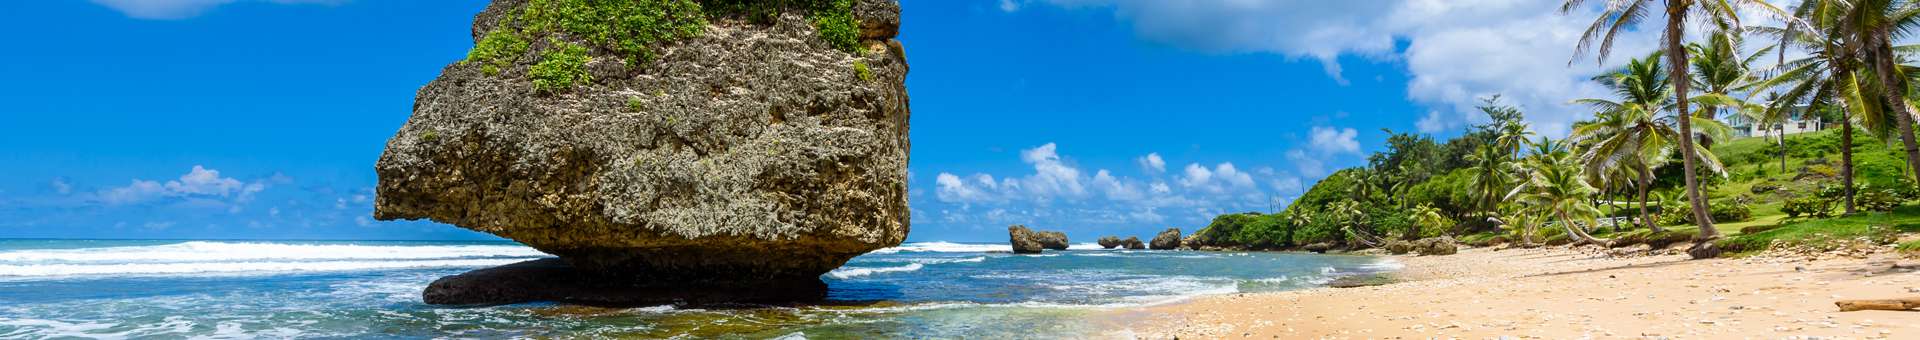 Search Whois information of domain names in Barbados